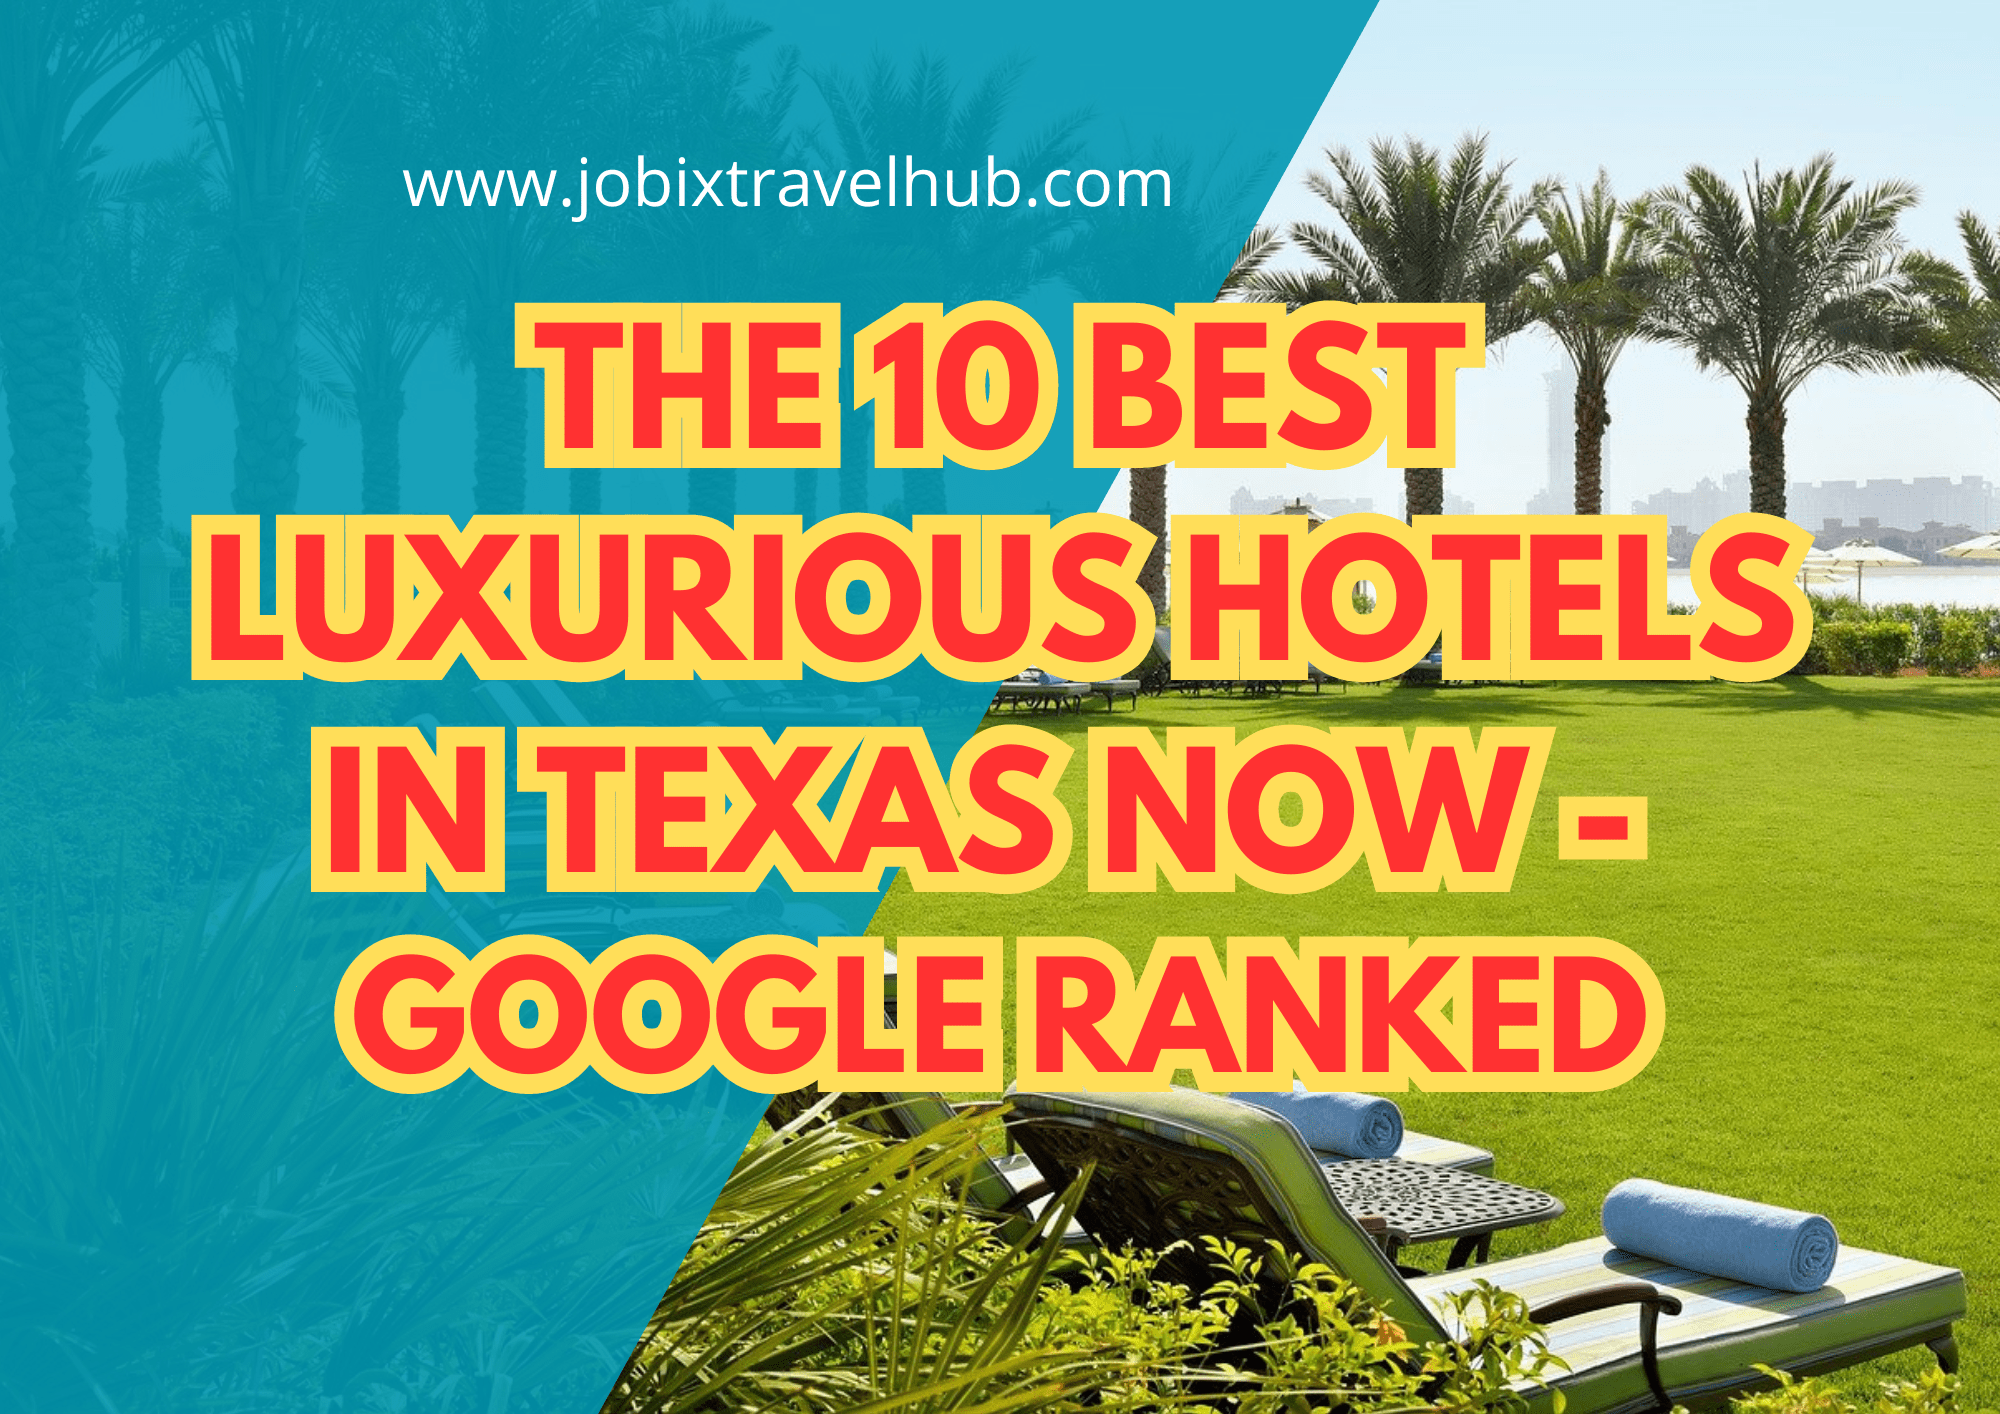 The 10 Best Luxurious Hotels In Texas Now - Google Ranked